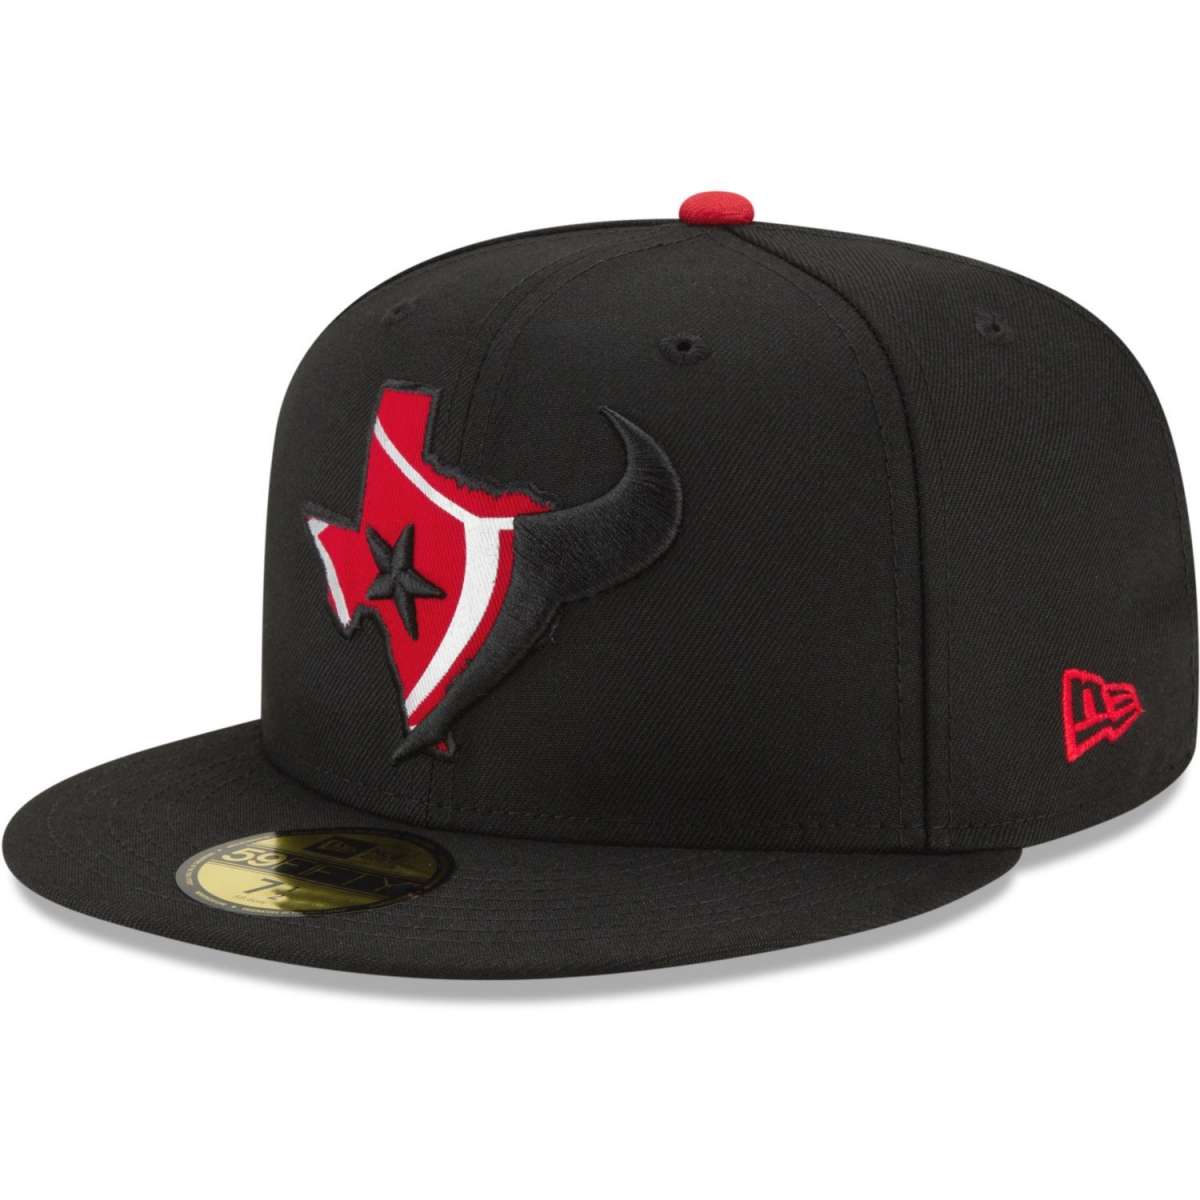 New Era 59Fifty Fitted Cap STATE Houston Texans Fitted Caps